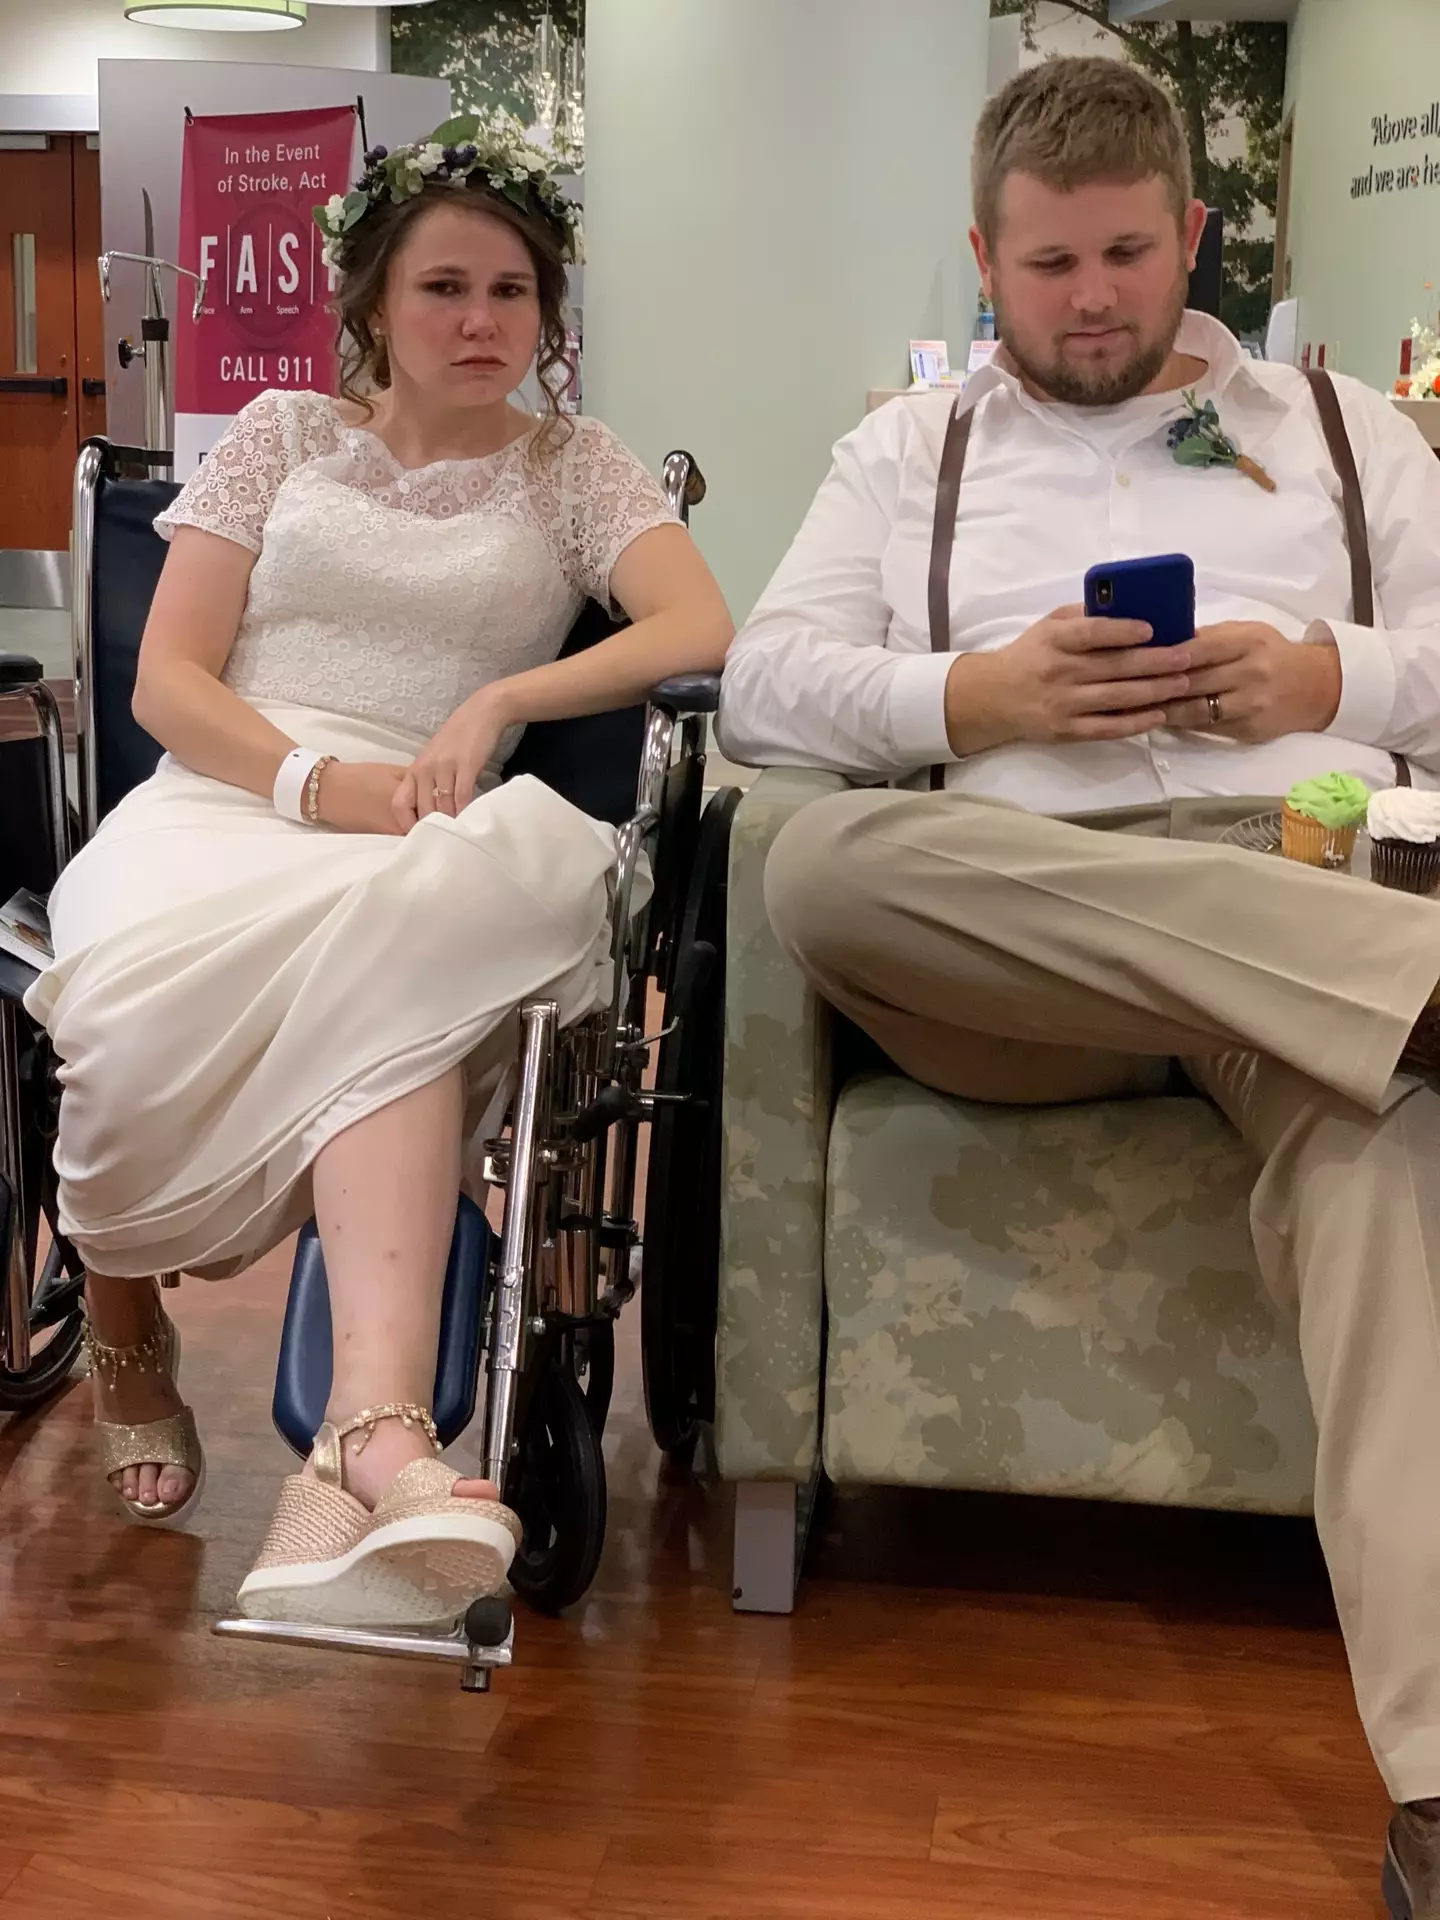 Mary and Blake spent their wedding night in the ER. (Kennedy News and Media)